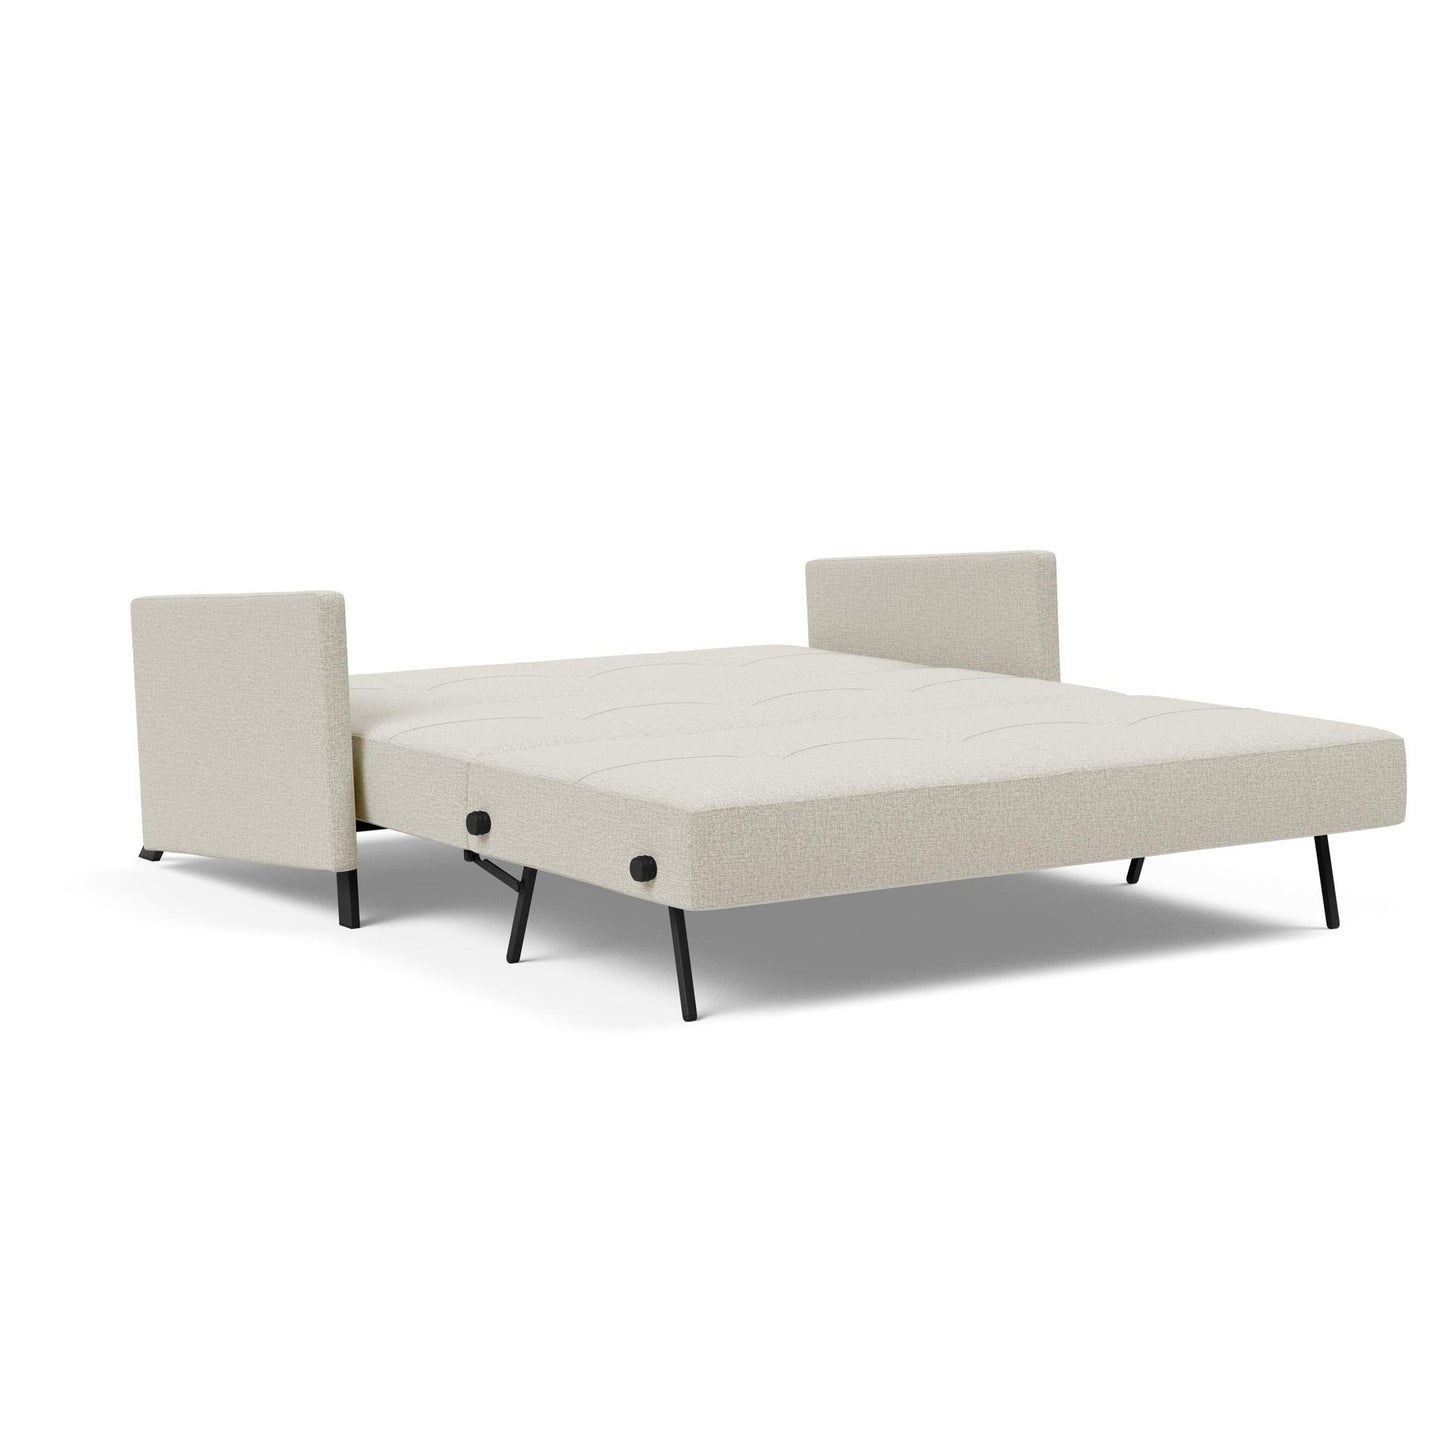 Cubed Deluxe Queen Sofa Bed w/Arms in Mixed Dance Natural